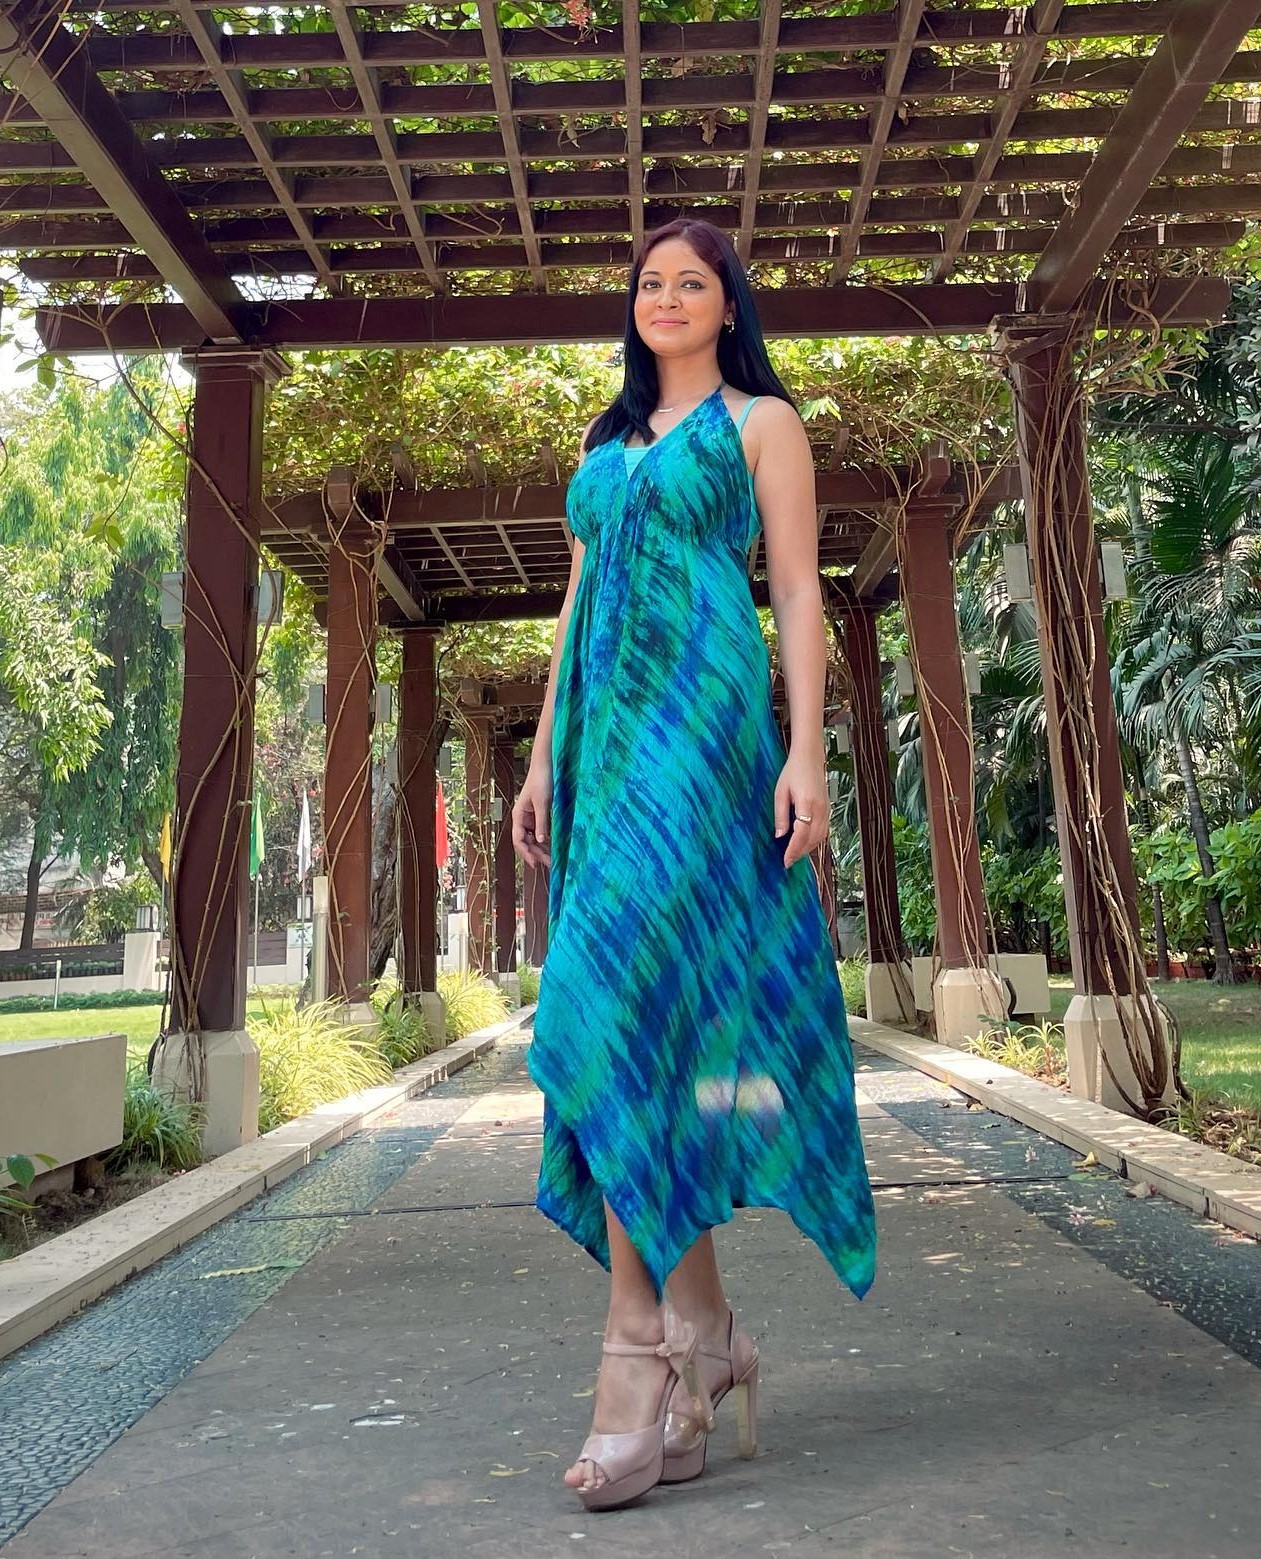 Parvathi Nirban Vacation Look In Blue Tie Printed Long Maxi Dress With Nude High Heels Stylish Outfits & Looks